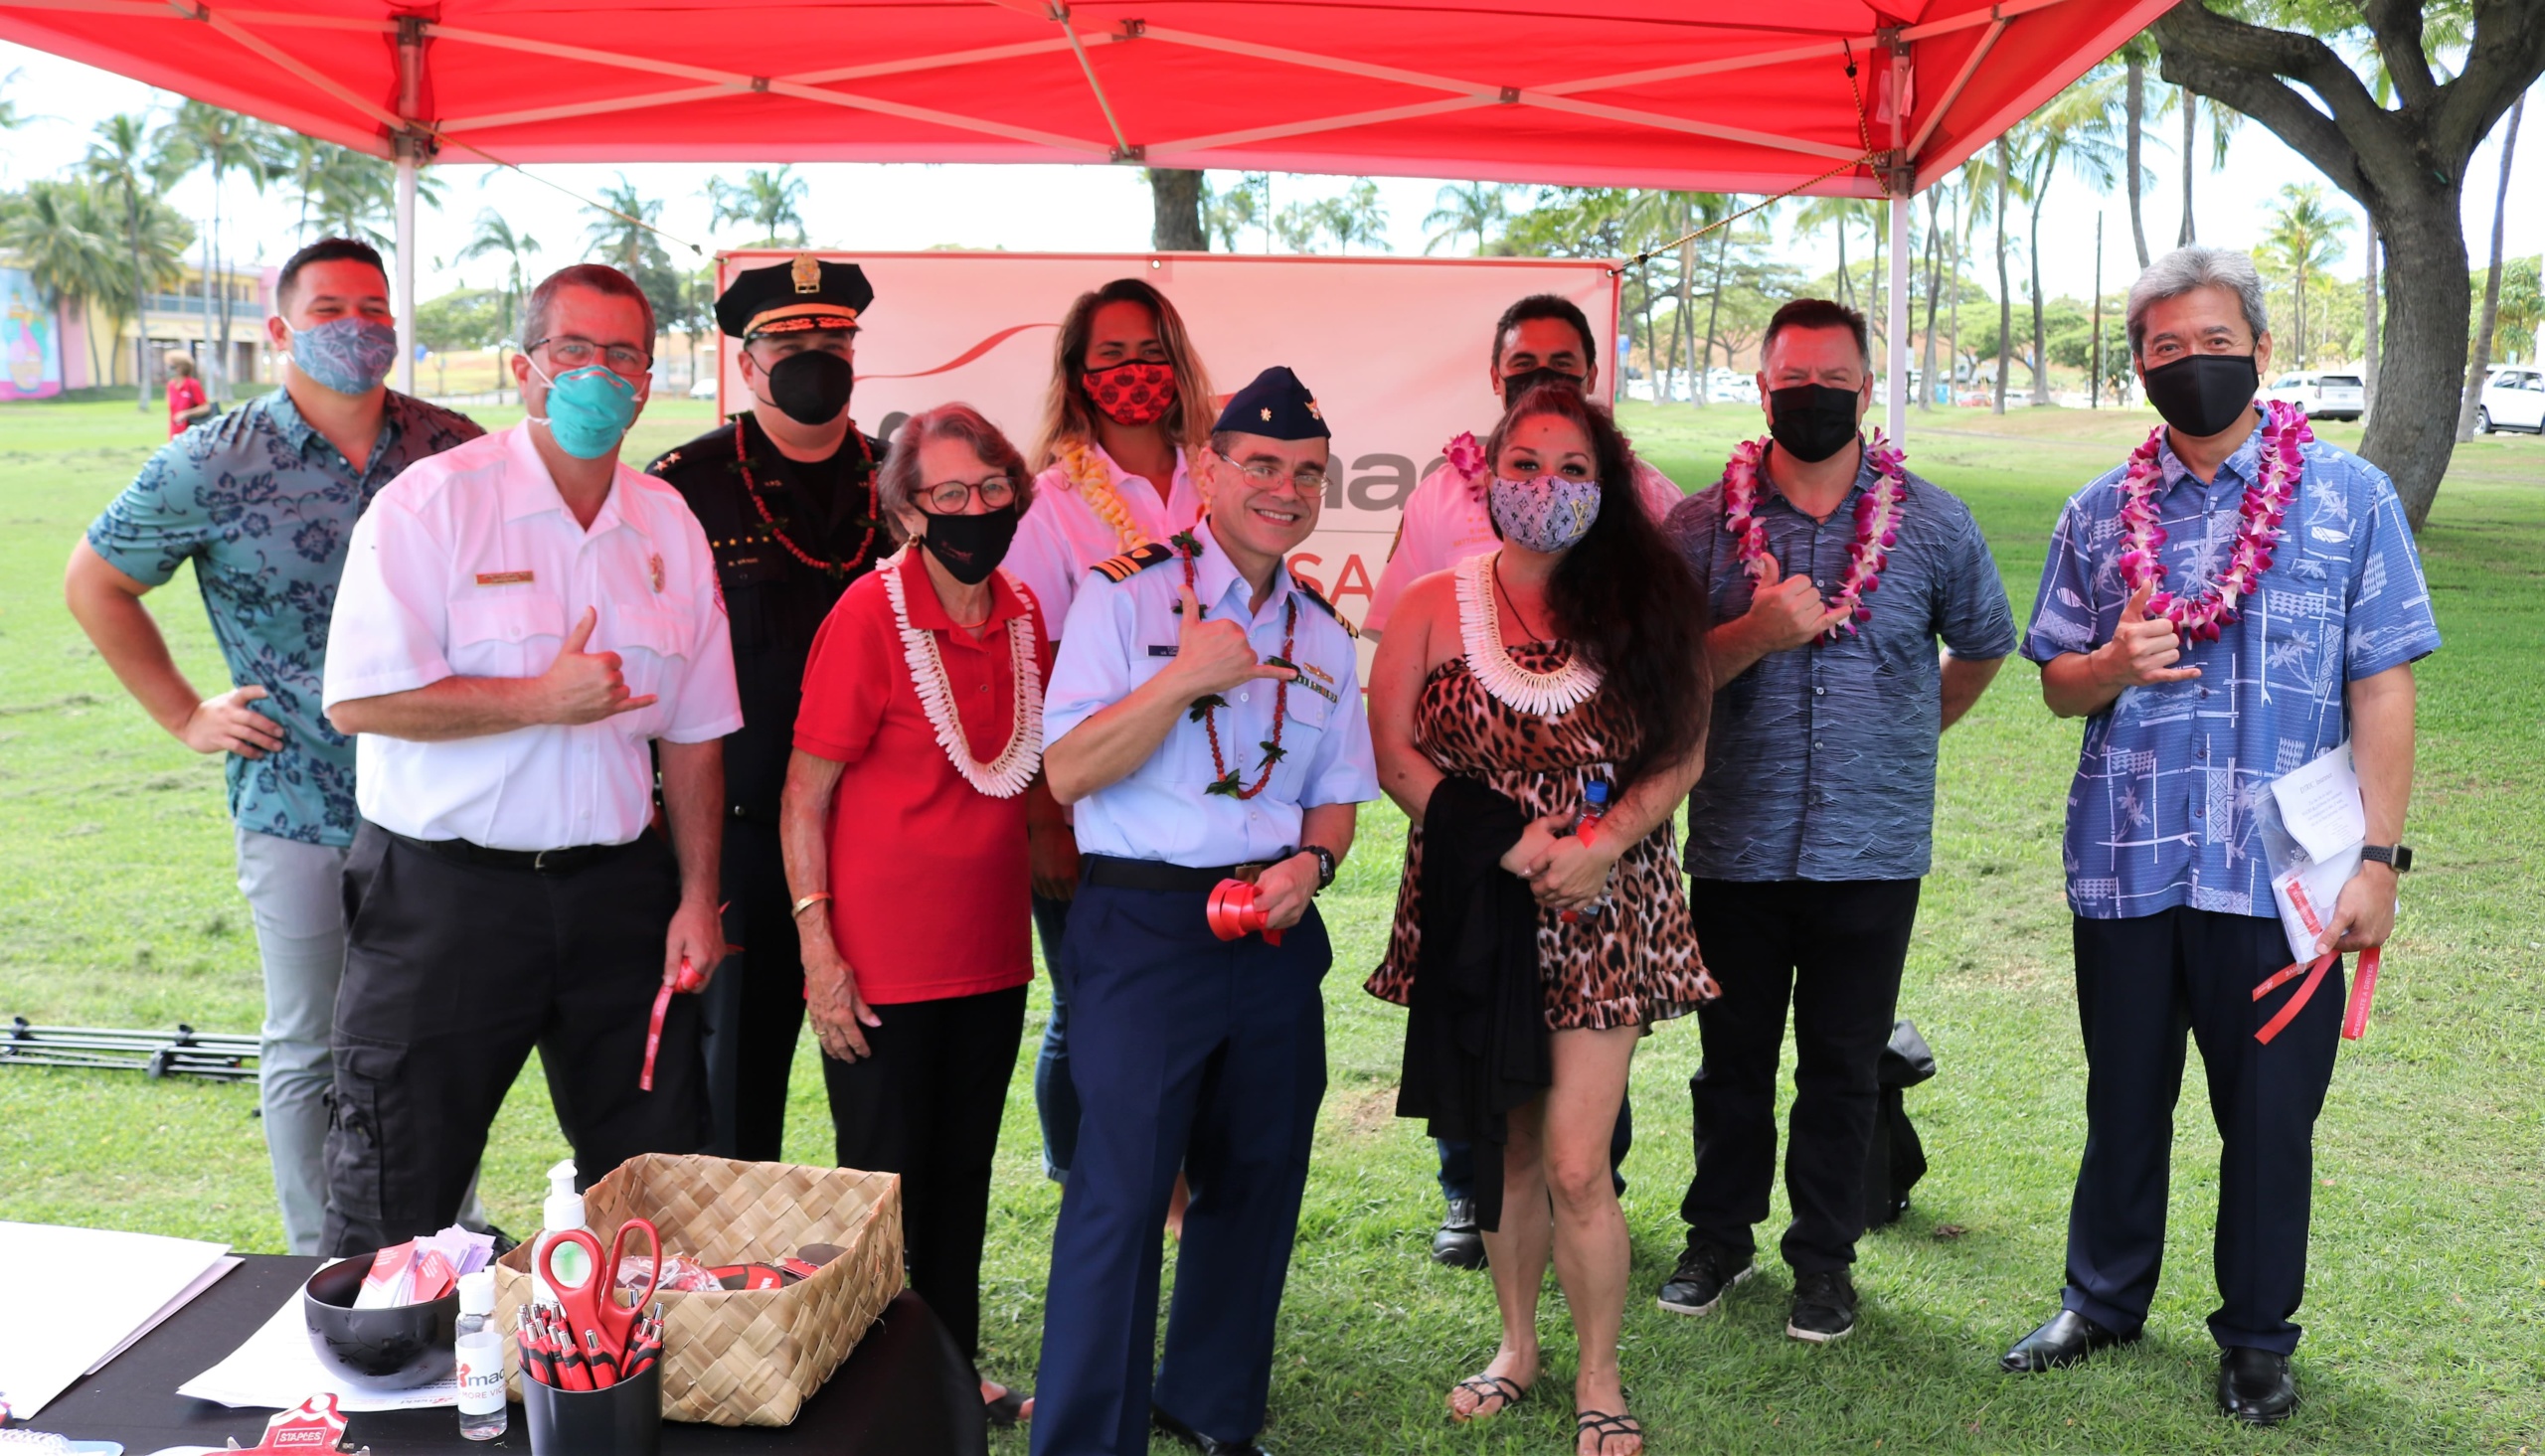 MADD HAWAII Kicks Off Annual “Tie One On for Safety” Campaign